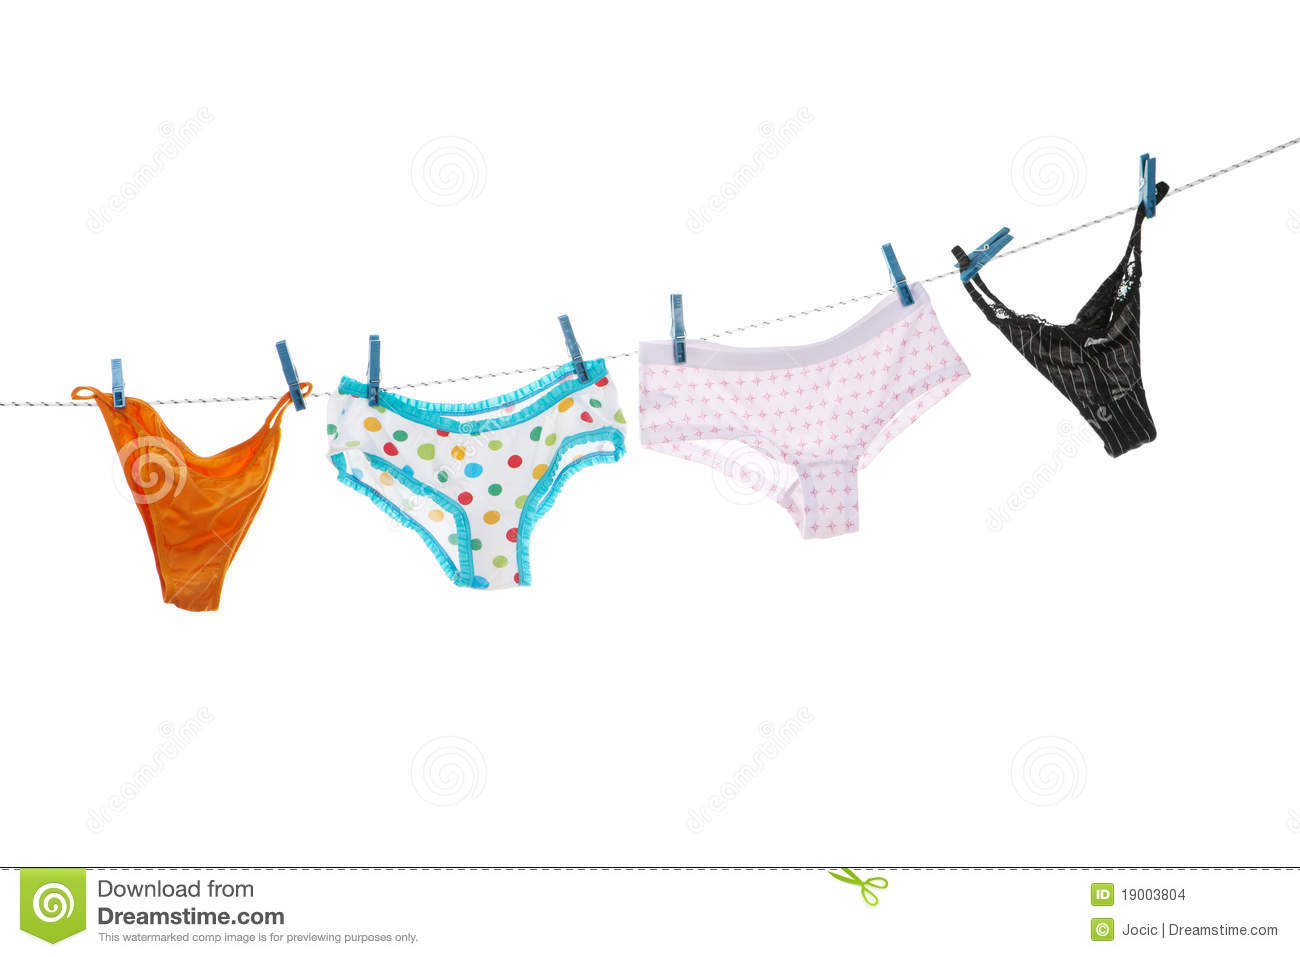 Panties Hanging On Clothesline Stock Images   Image  19003804